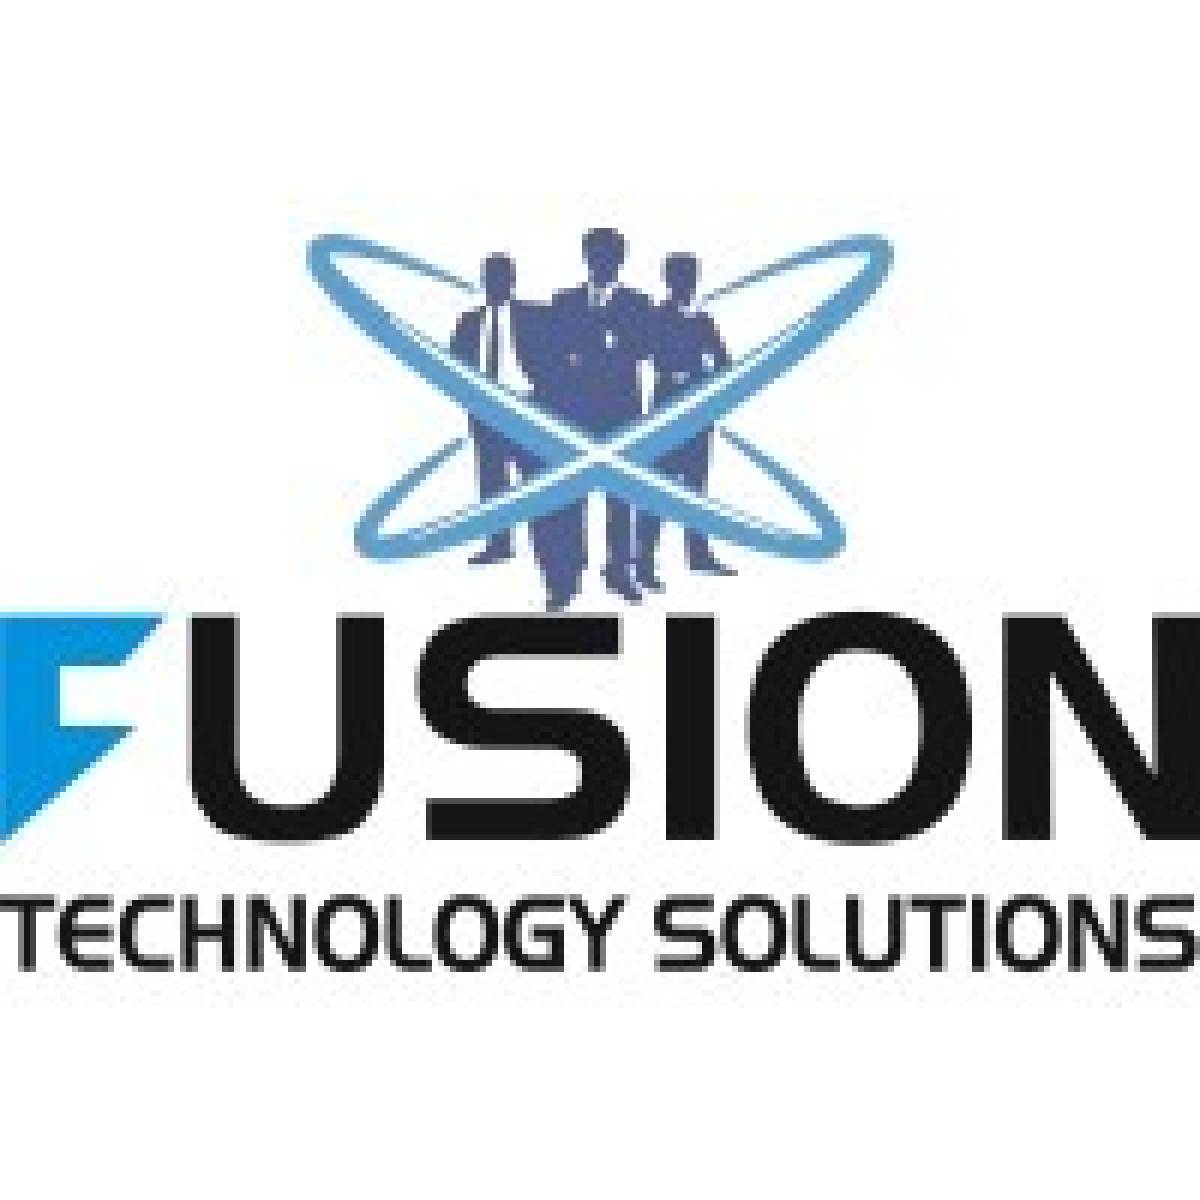 FUSION

TECHNOLOGY SOLUTIONS